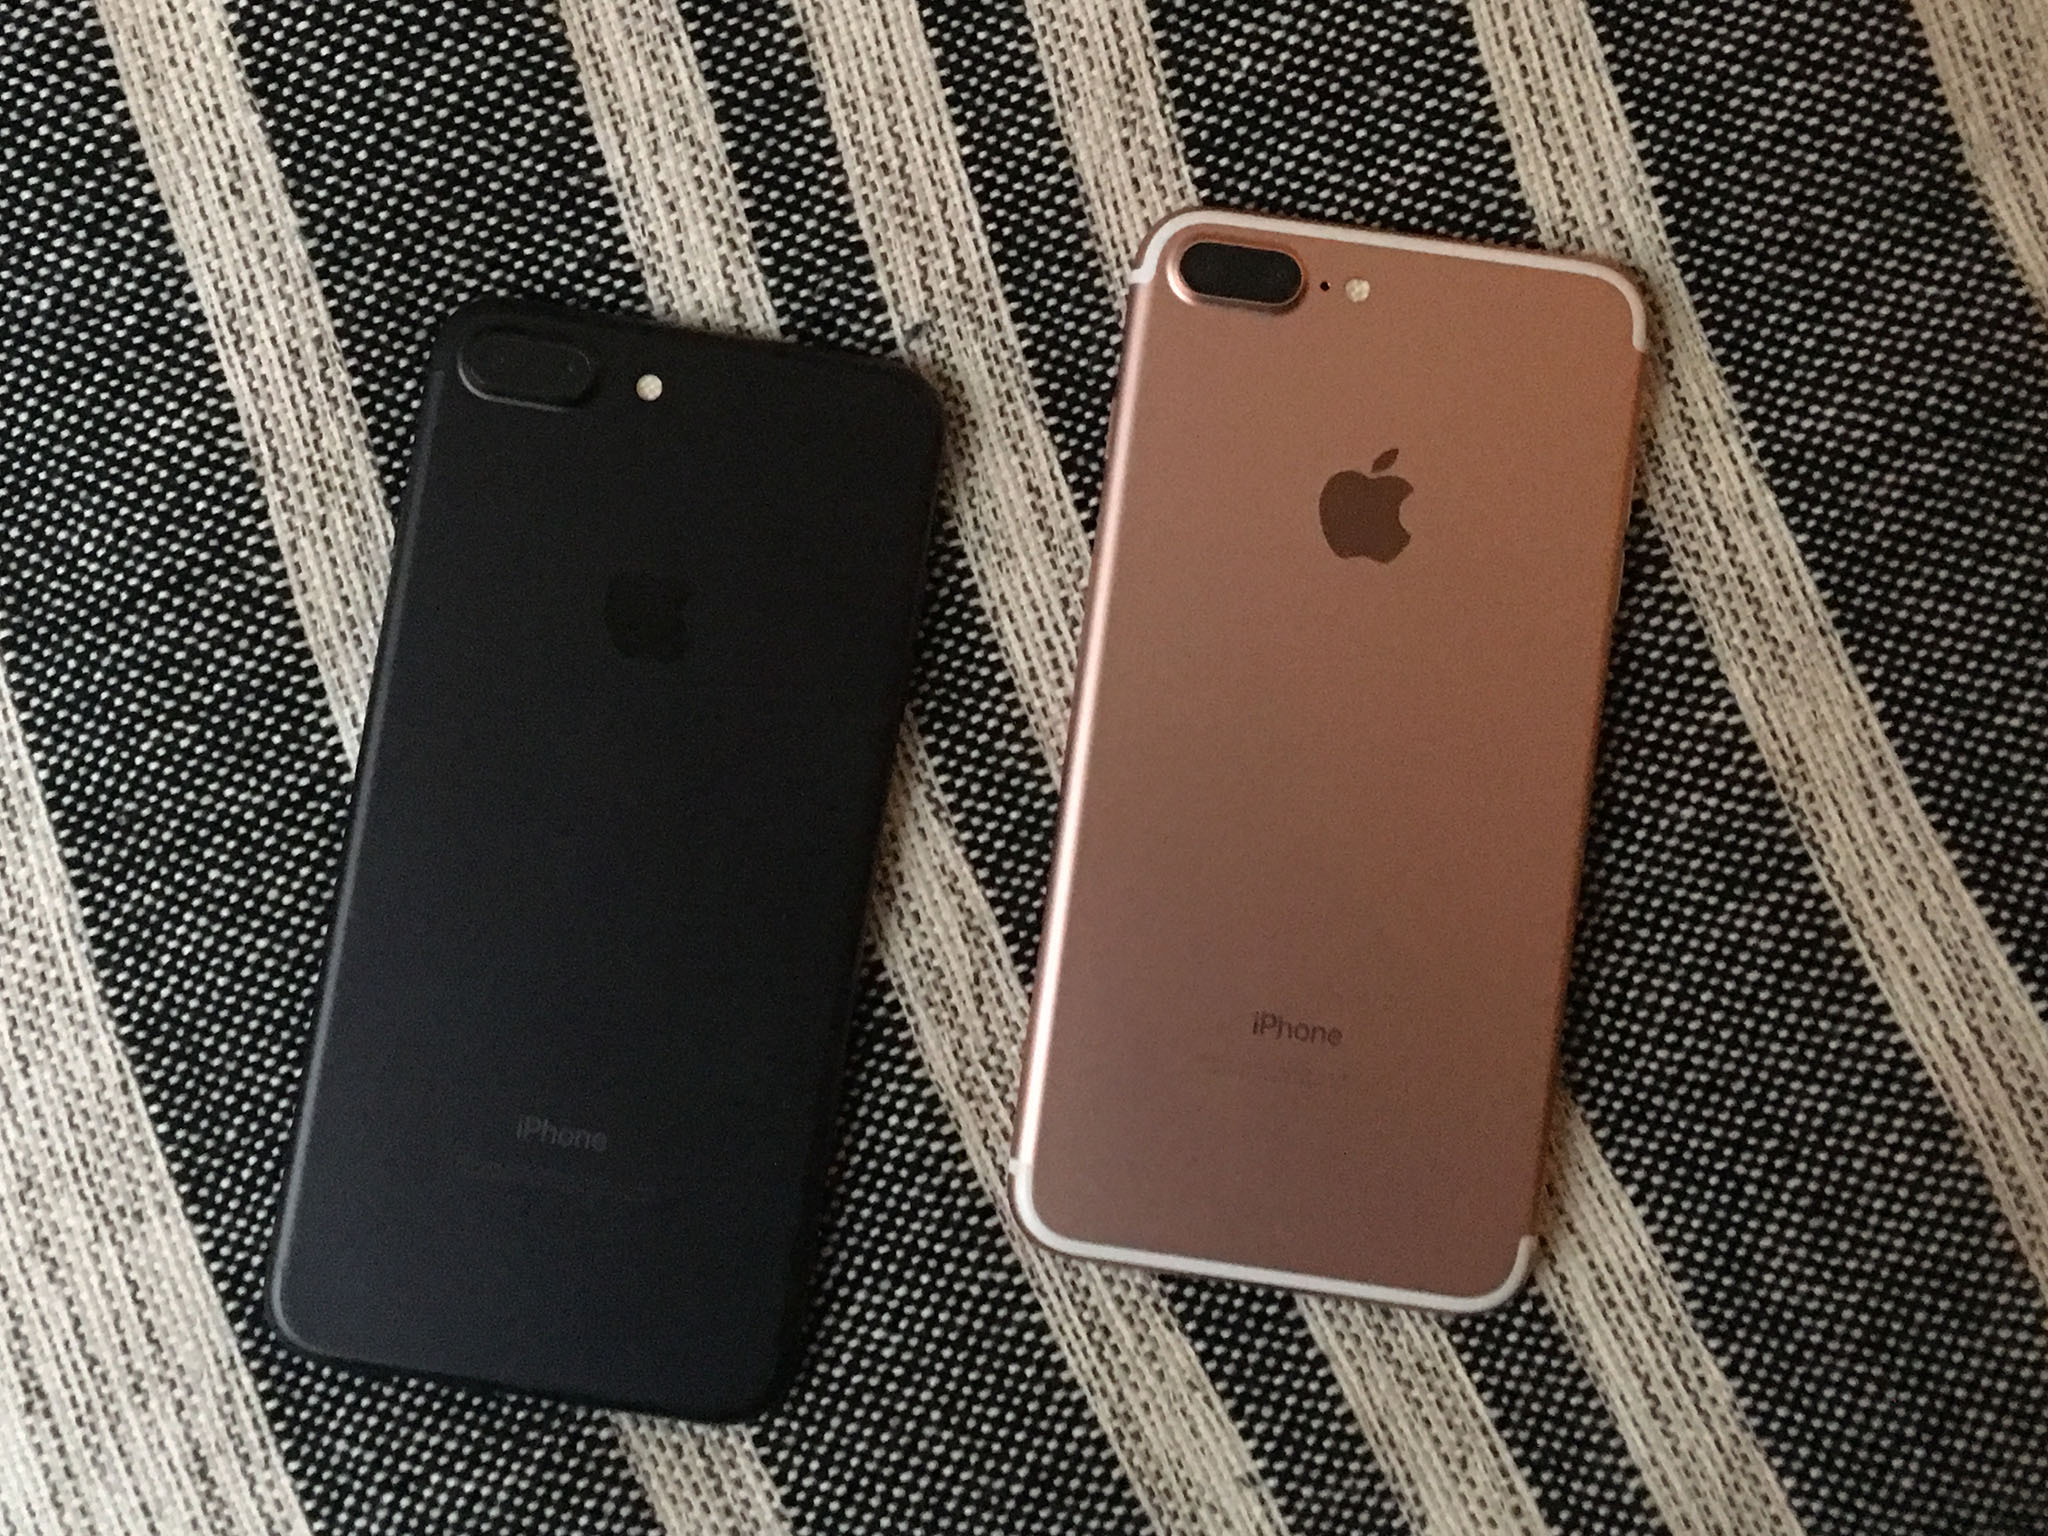 What Color Iphone 7 Should You Get Silver Gold Rose Gold Black Jet Black Or Product Red Imore